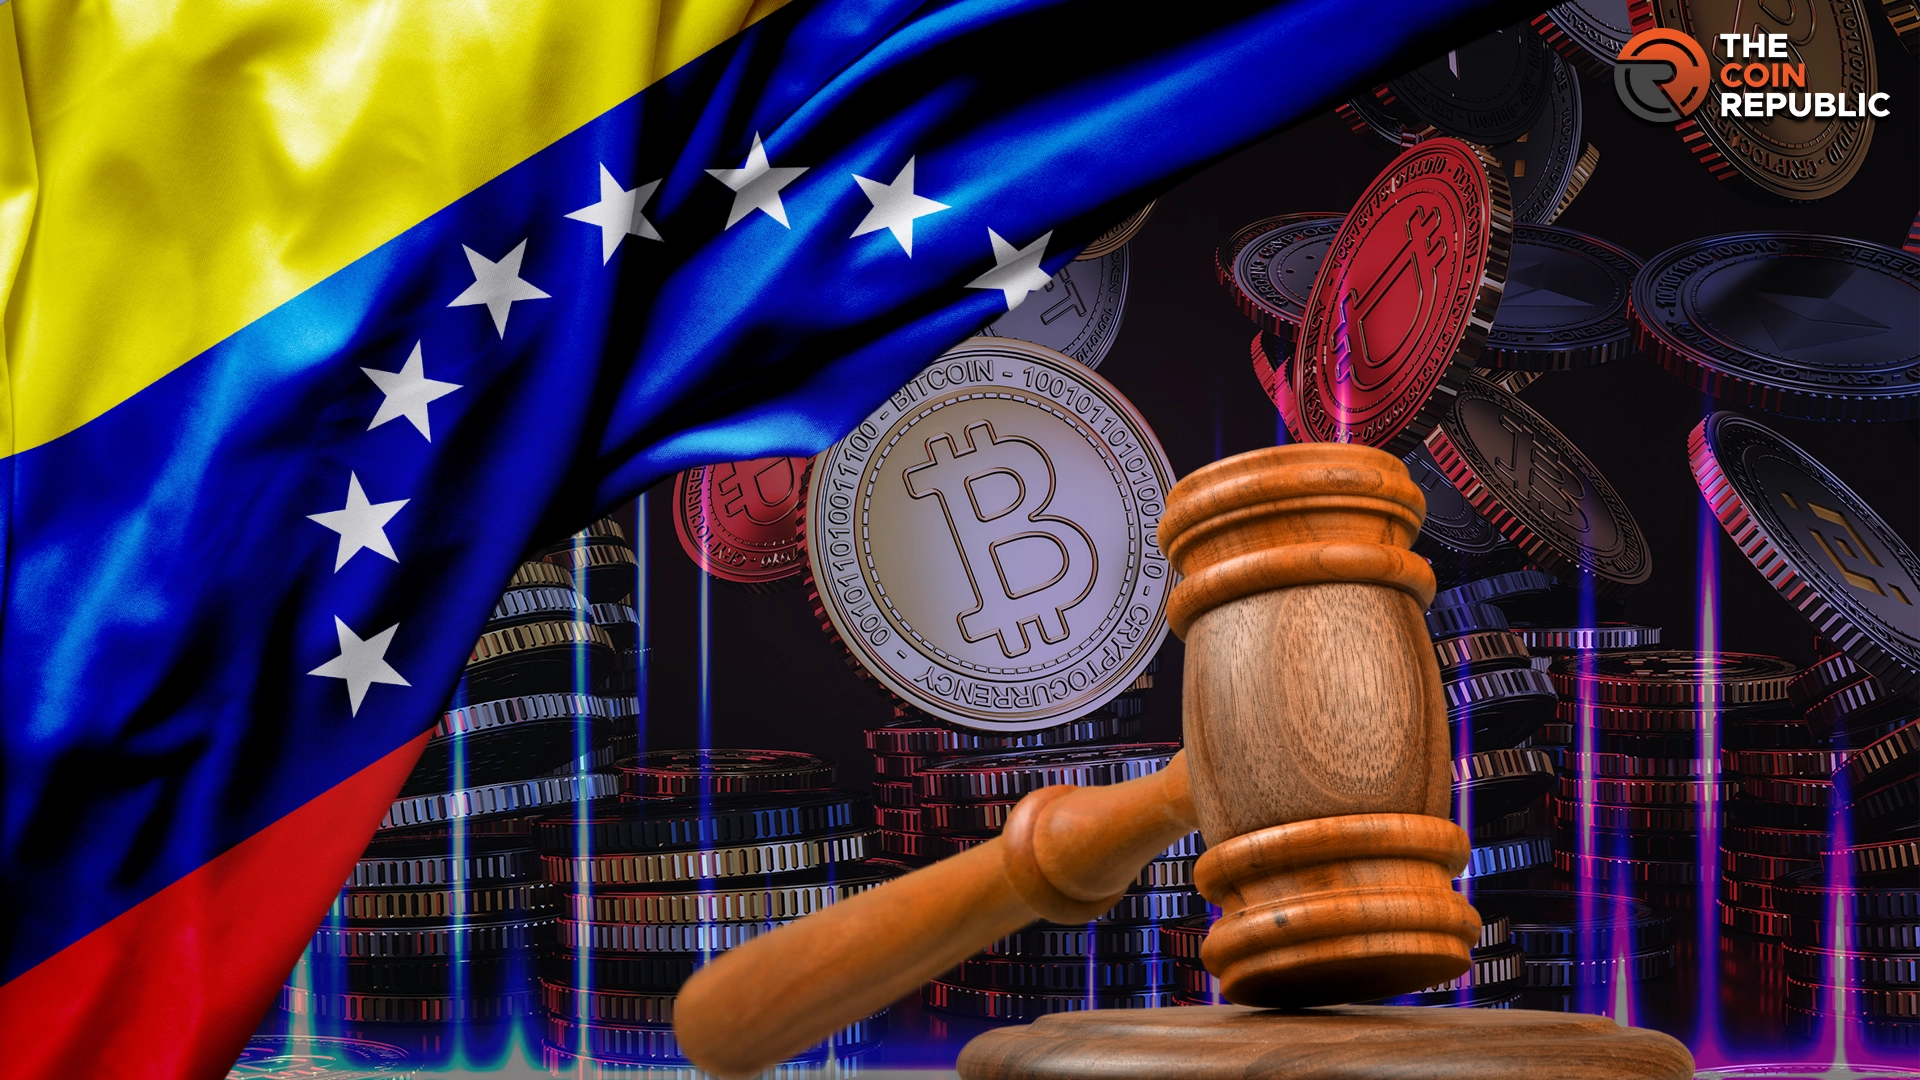 Venezuela’s Digital Currency Uses Is Subject To Strict Regulation